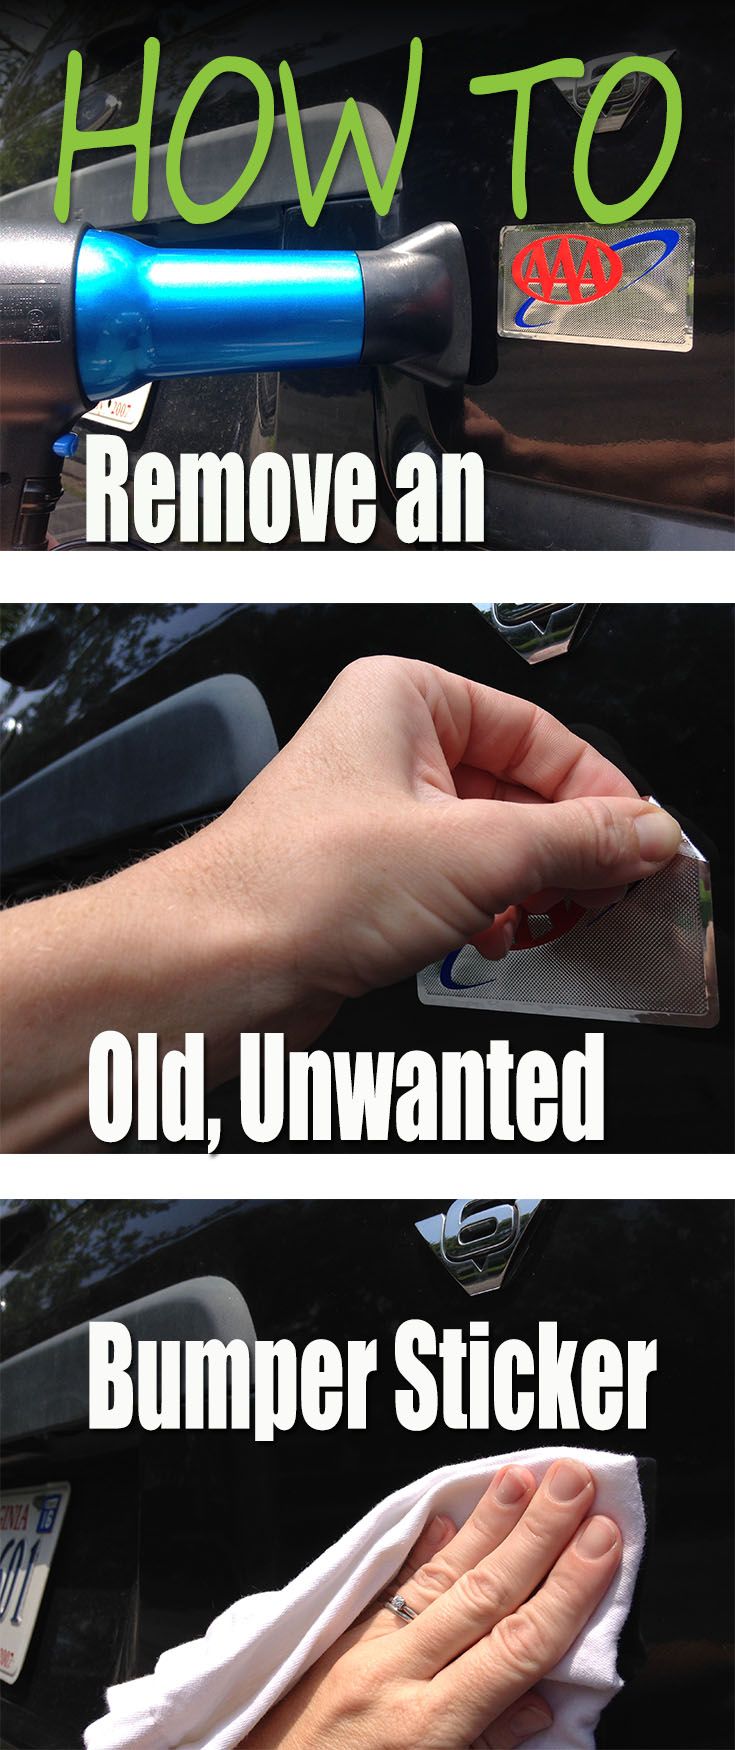 How to Remove Stickers From Car: Step By Step | Sticker removal, Car